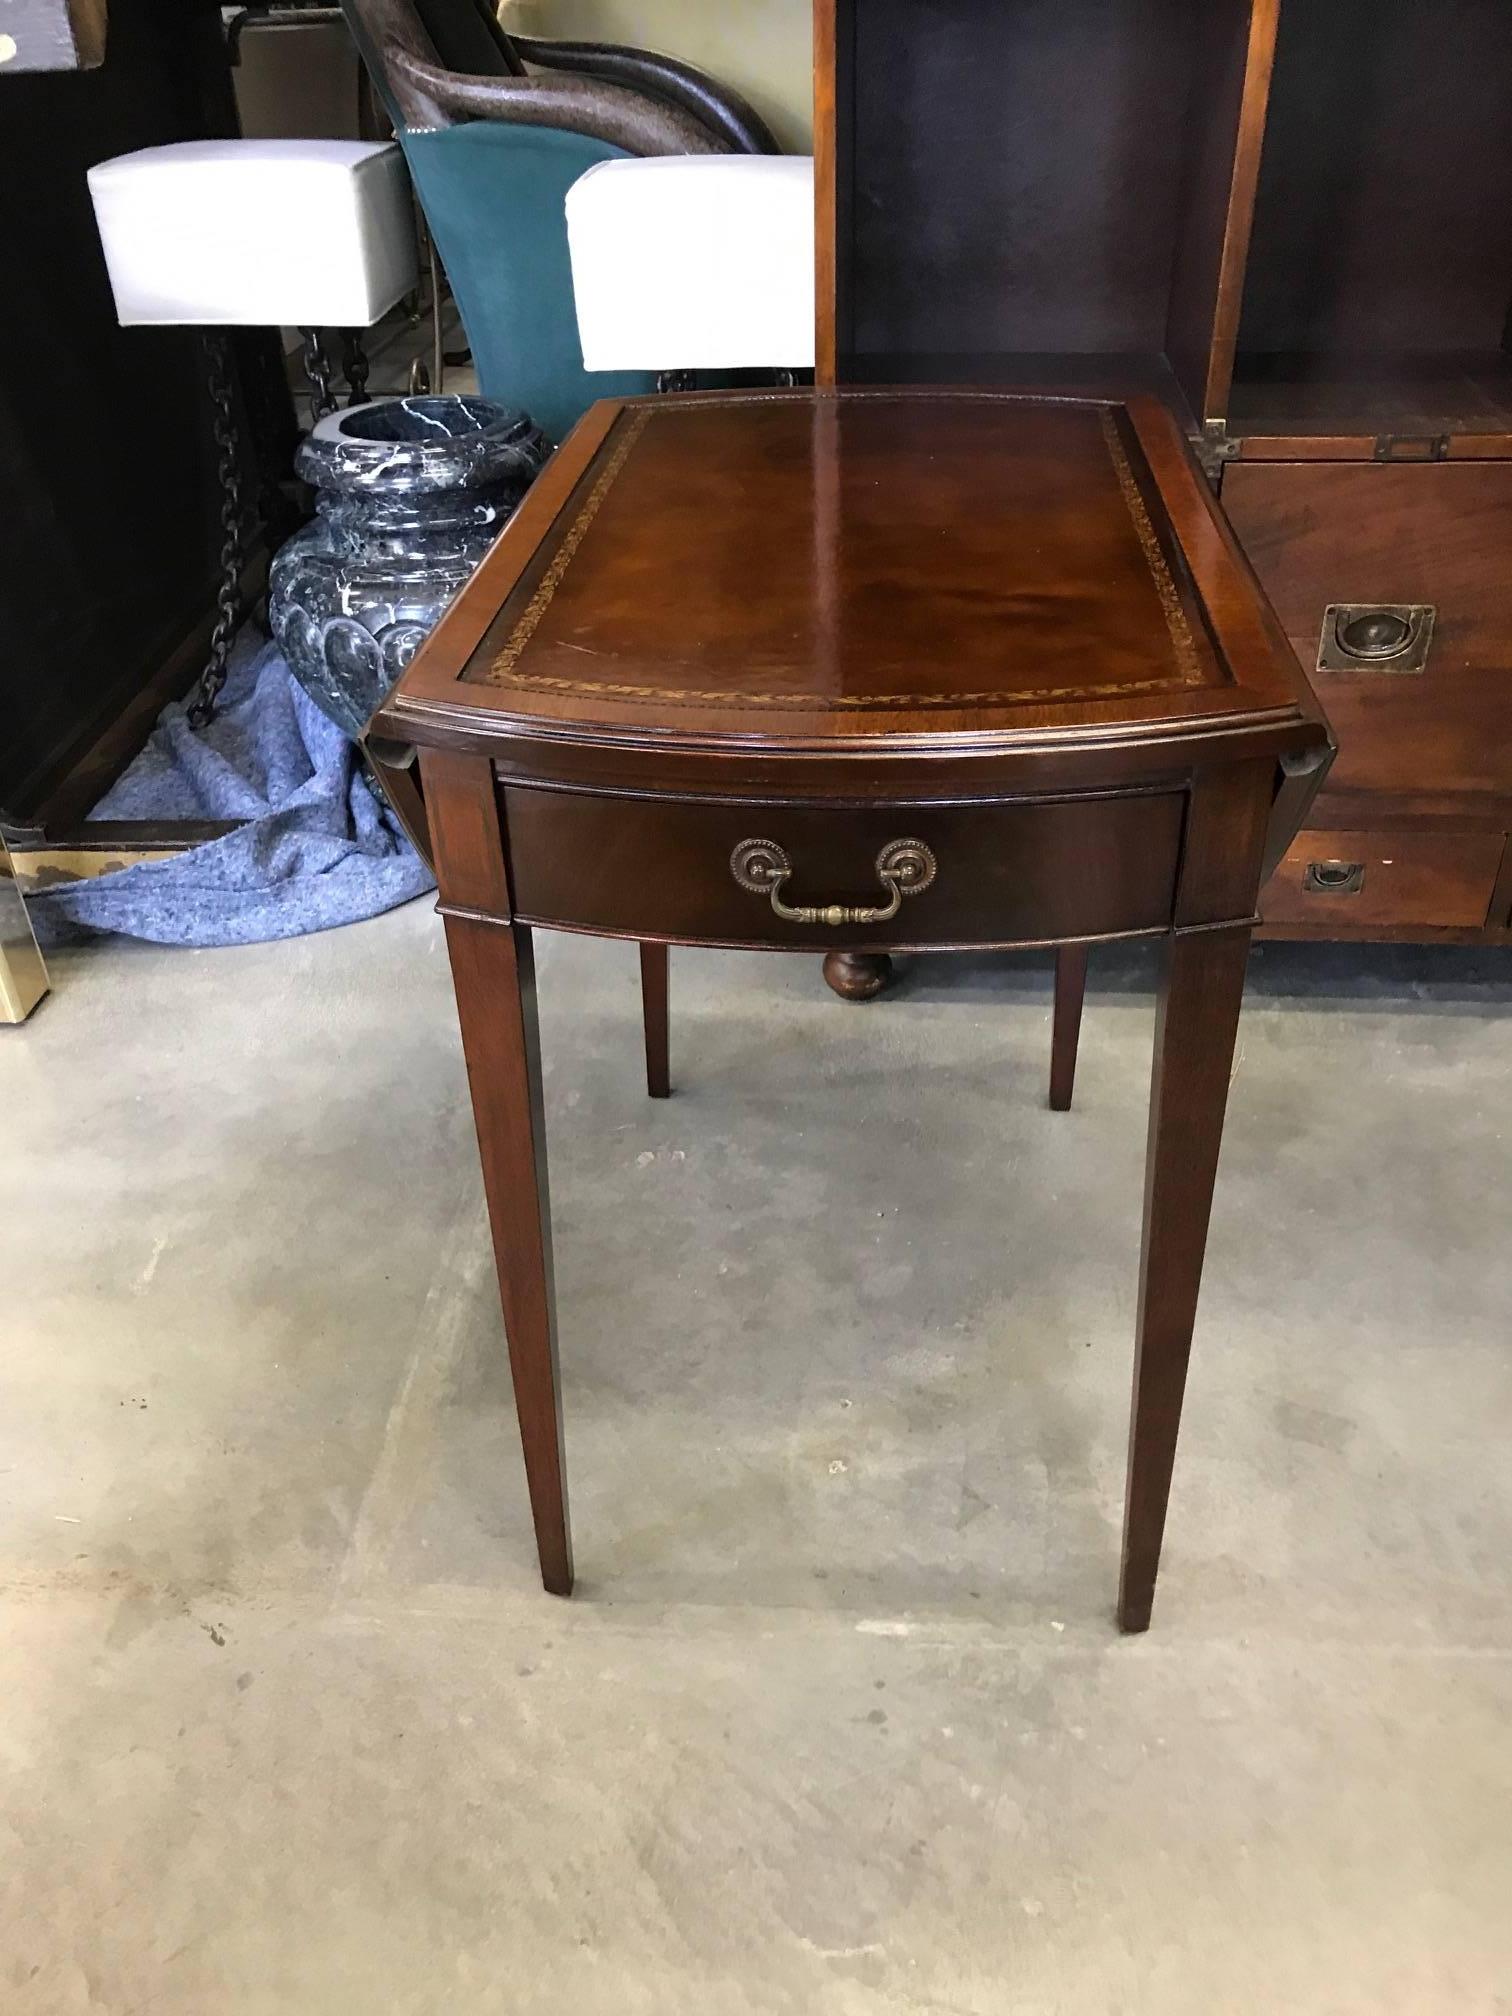 Versatile pair of mahogany pembroke tables with leather tops. The leather tooled tops with centre front drawer supported by four tapering legs. Timeless and classic. The leather is in very good condition showing with no tears and very durable. It